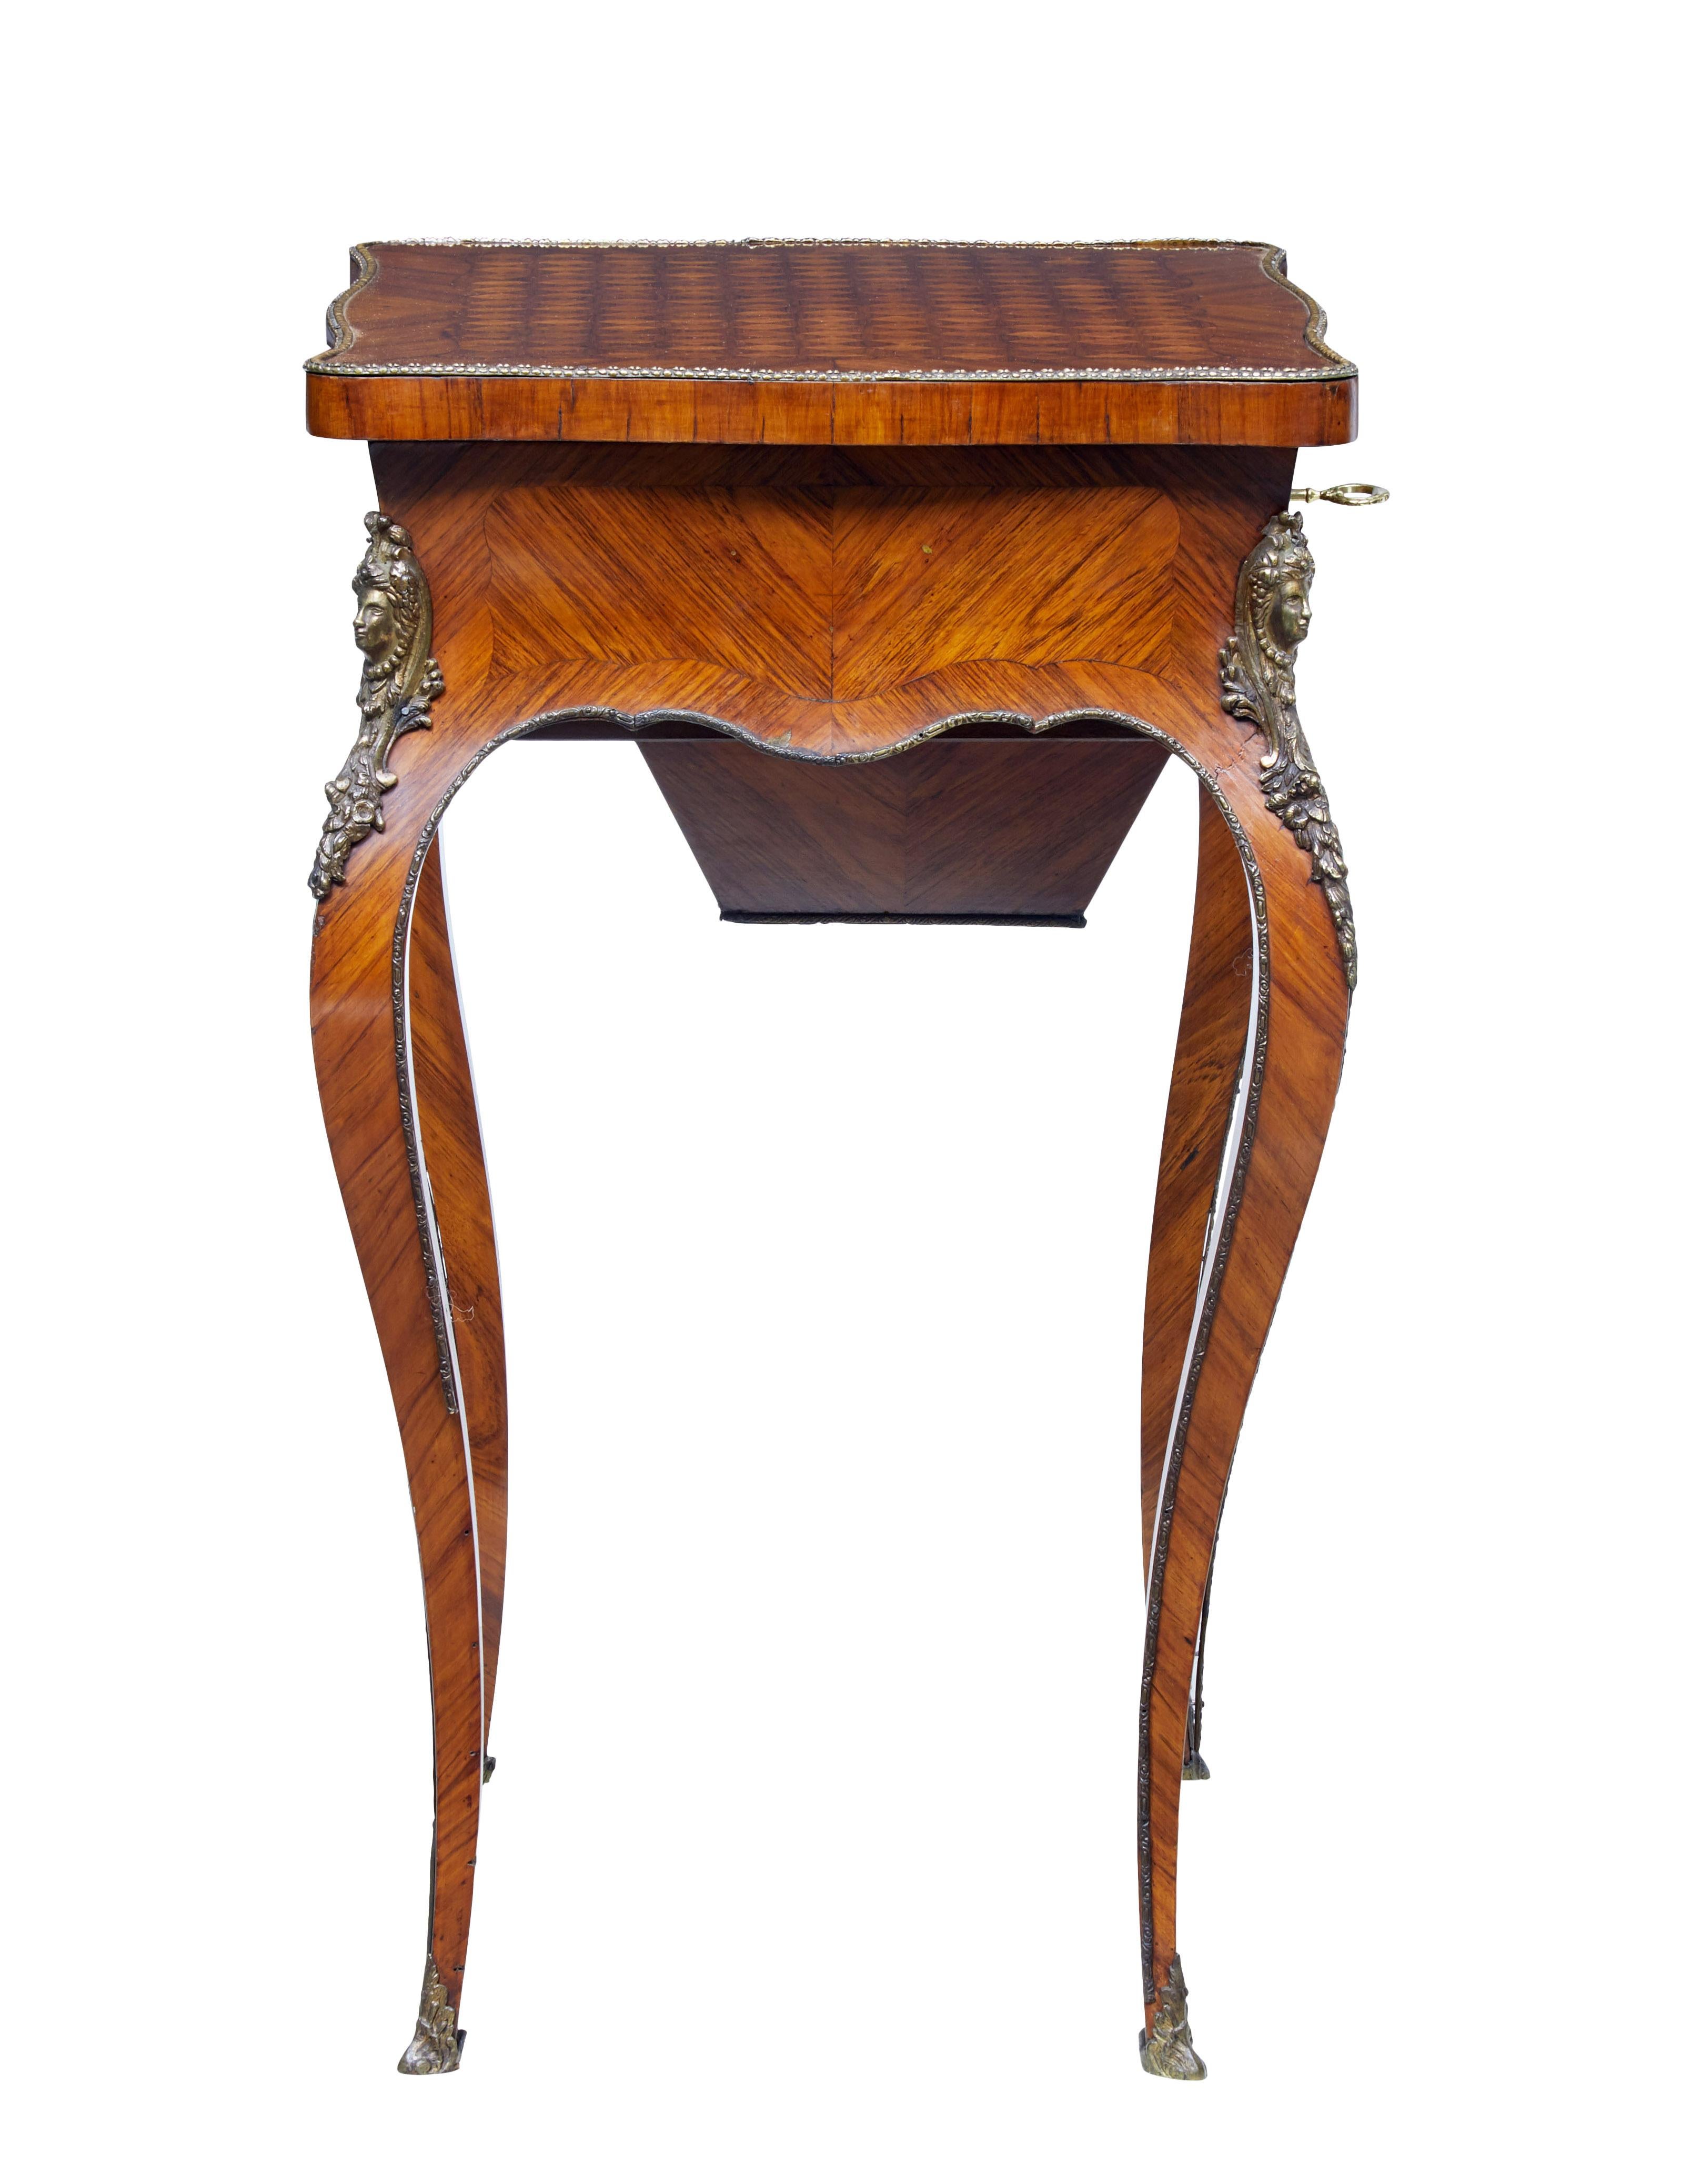 Hand-Carved 19th Century French Kingwood Sewing Table